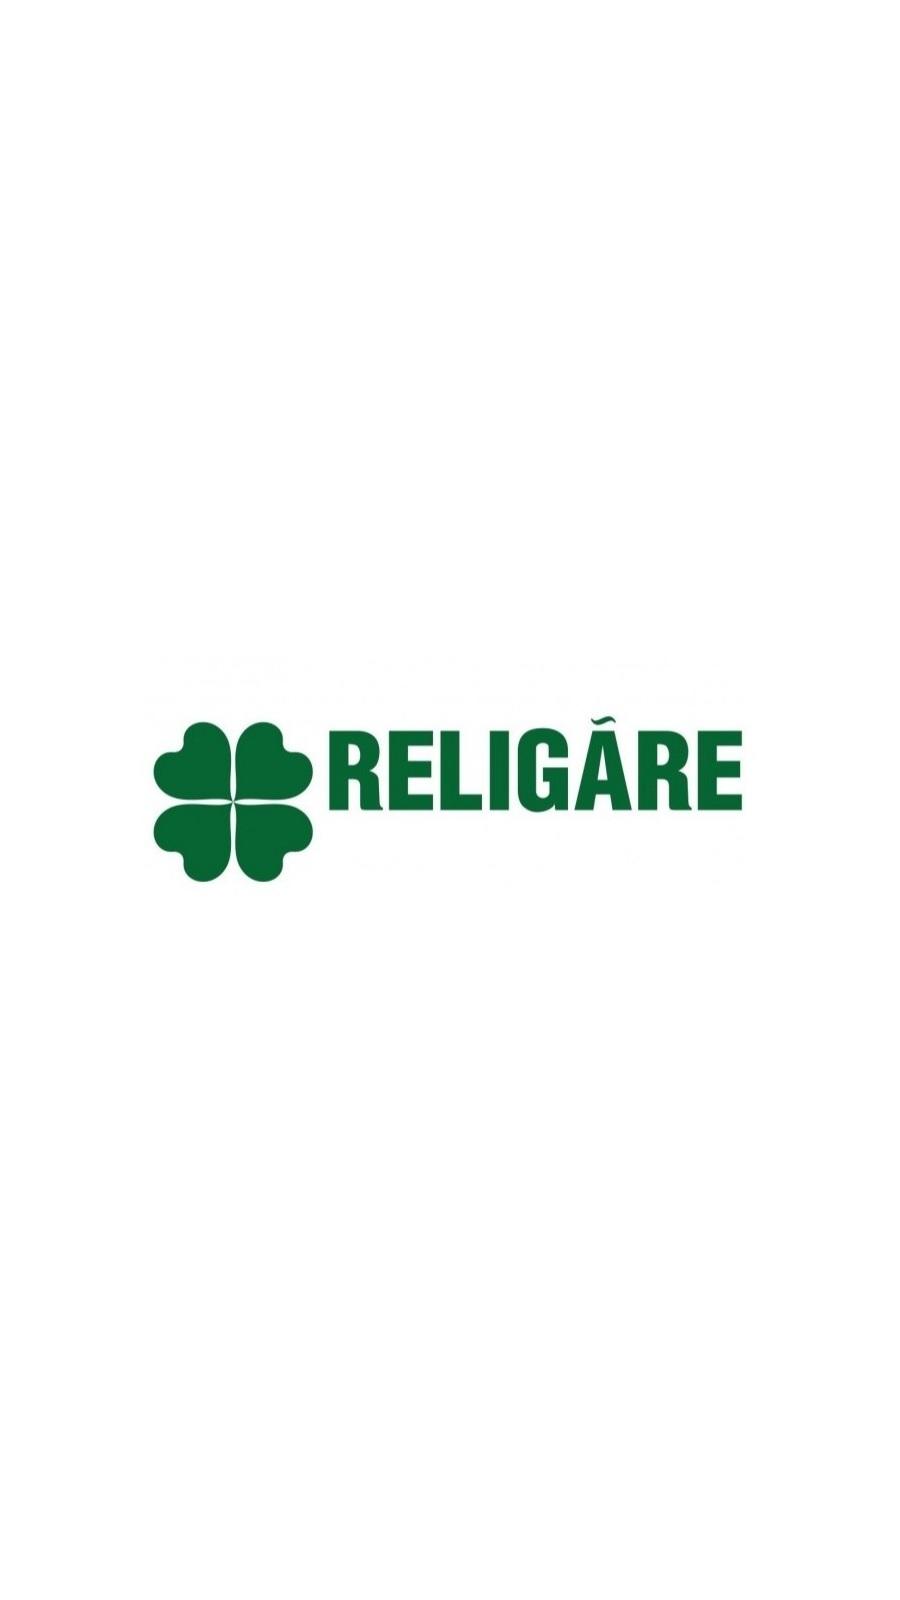 Religare logo in transparent PNG format